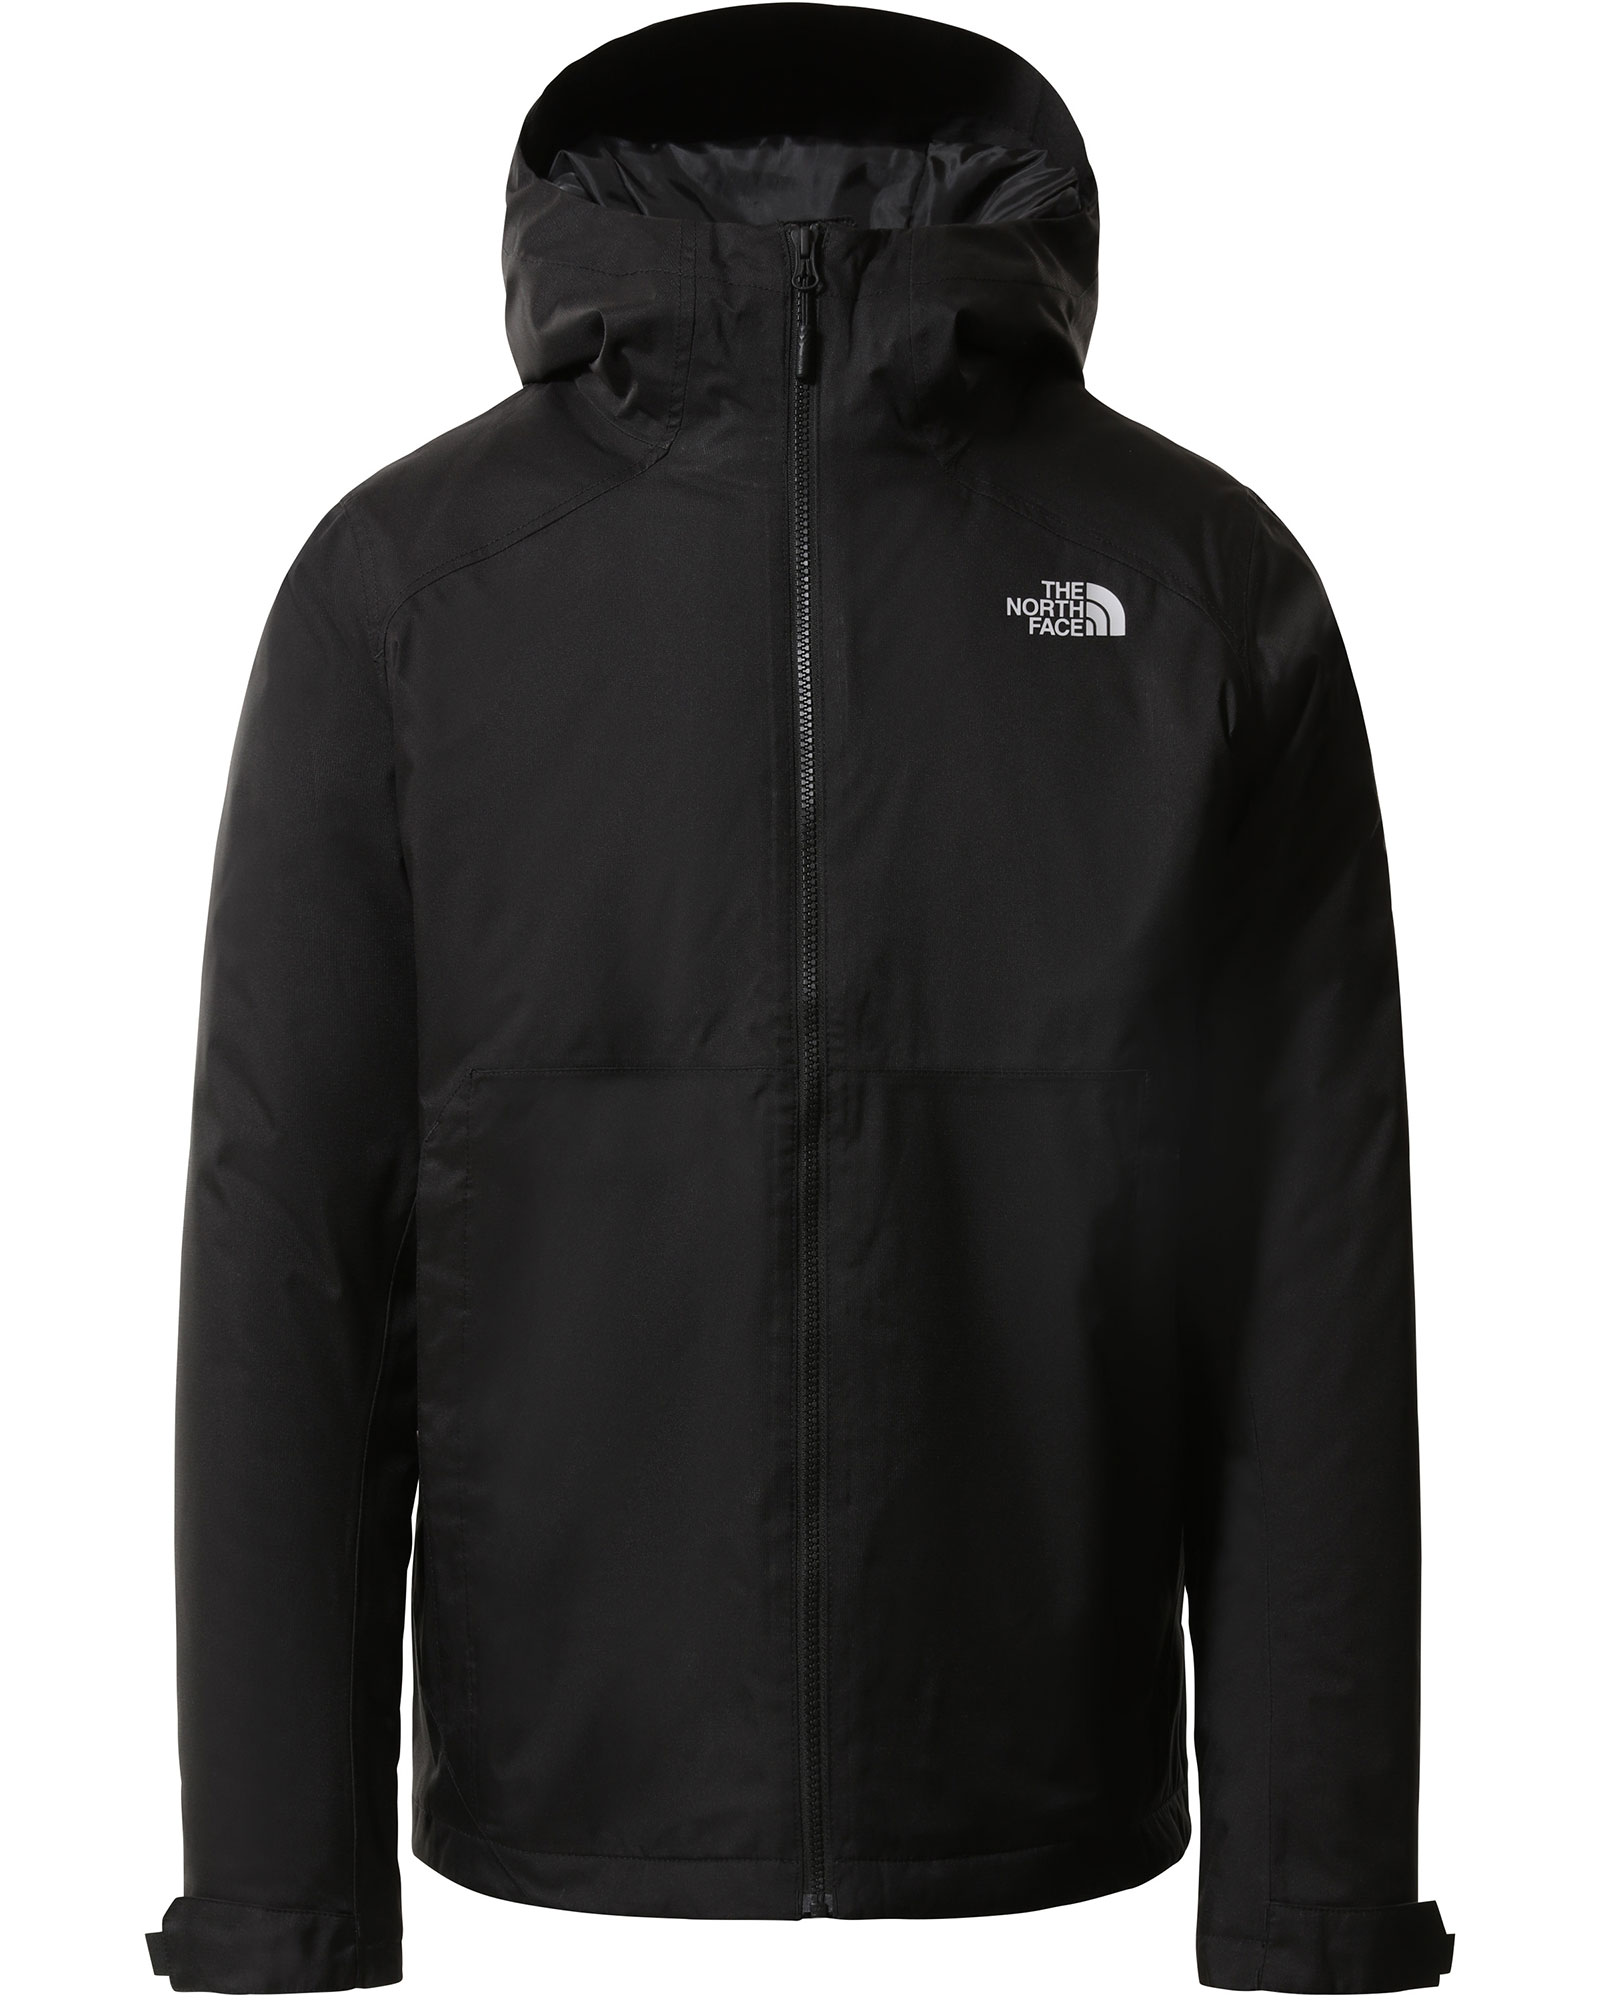 The North Face Millerton DryVent Men’s Insulated Jacket - TNF Black M